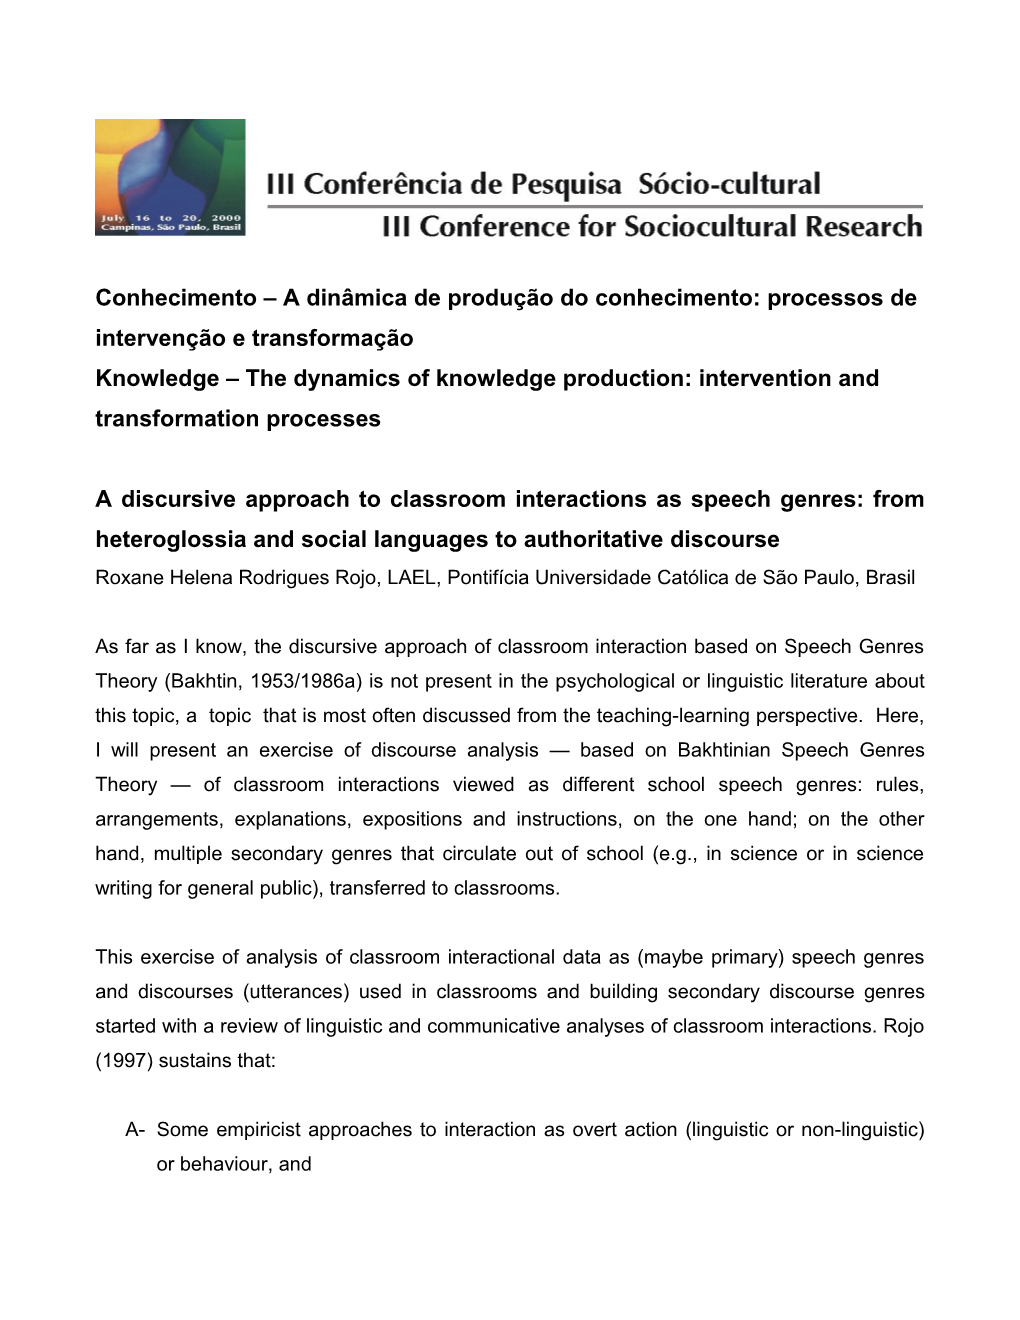 A Discursive Approach to Classroom Interactions As Speech Genres: from Heteroglossia And